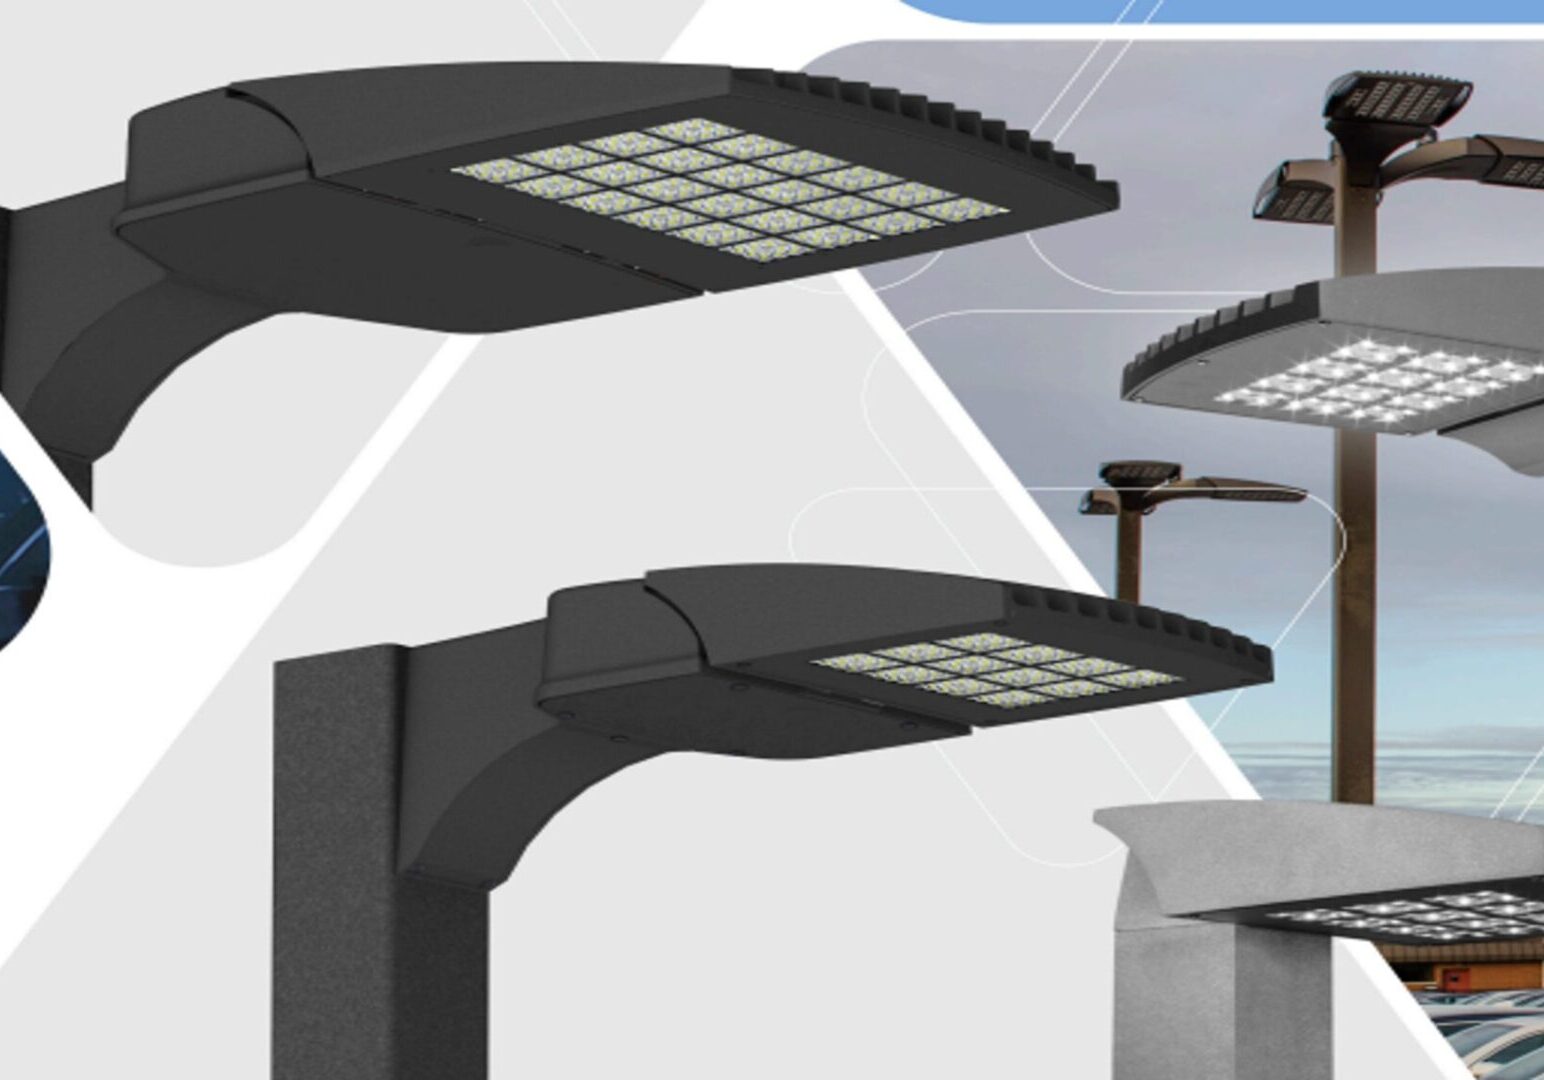 A series of different types of street lights.